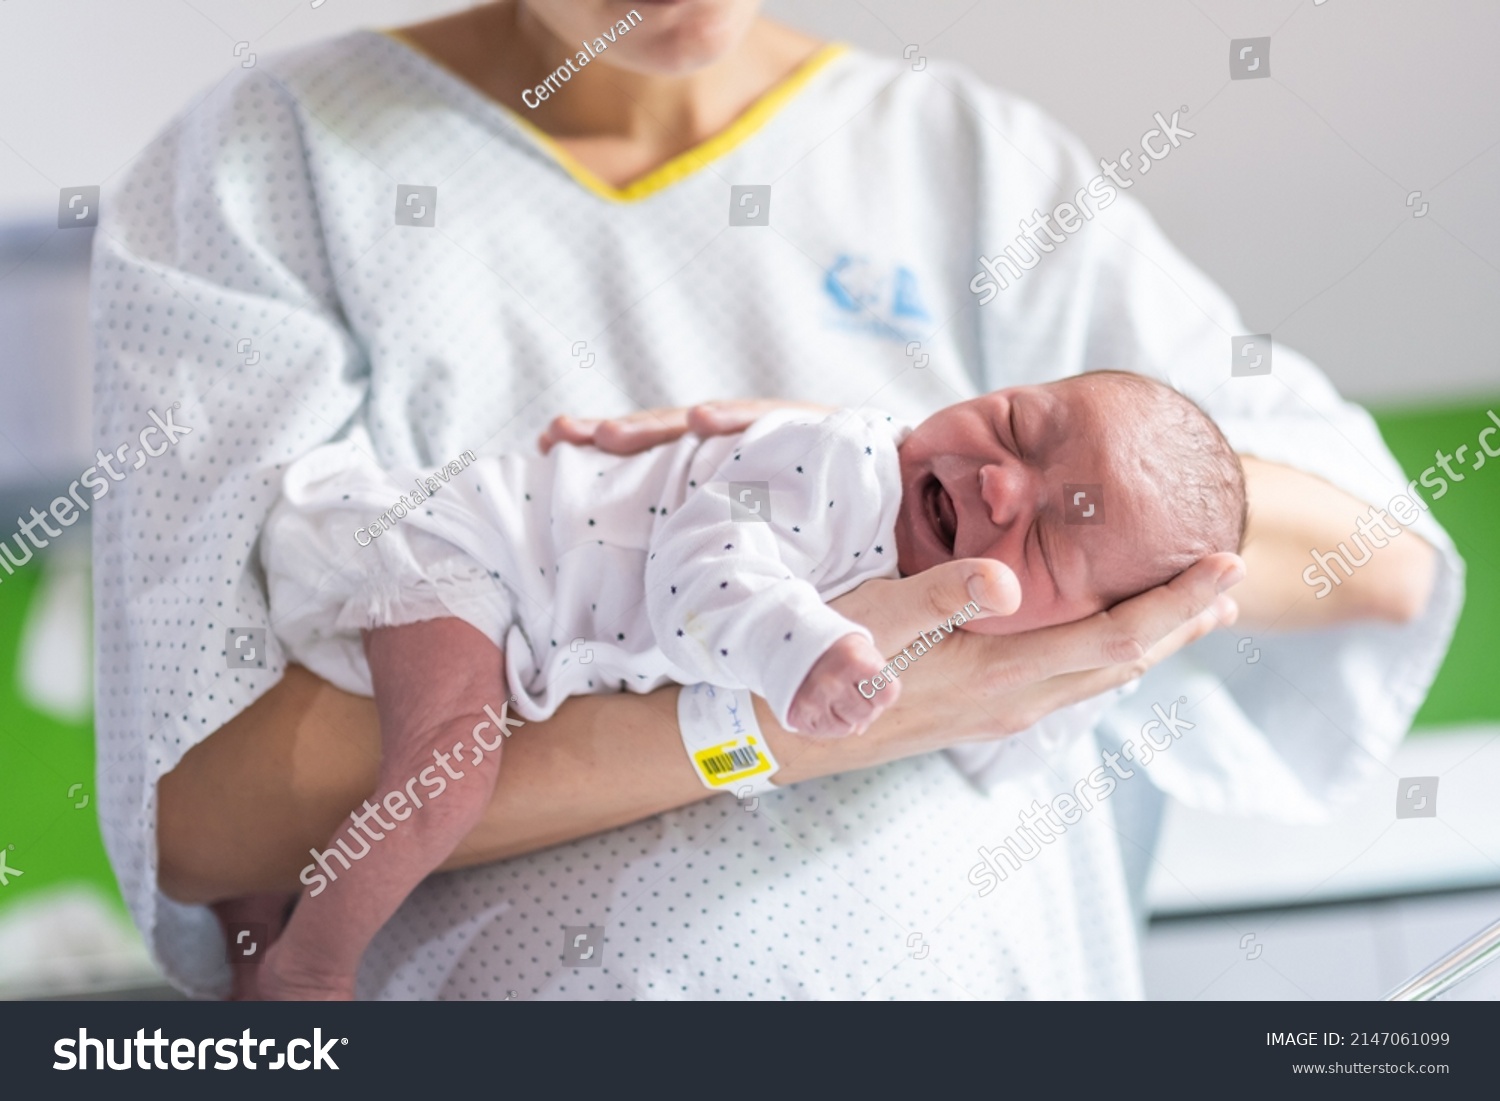 woman who has just given birth in the hospital holds her newborn baby in her arms face down to calm the crying colic of the infant. newborn care #2147061099